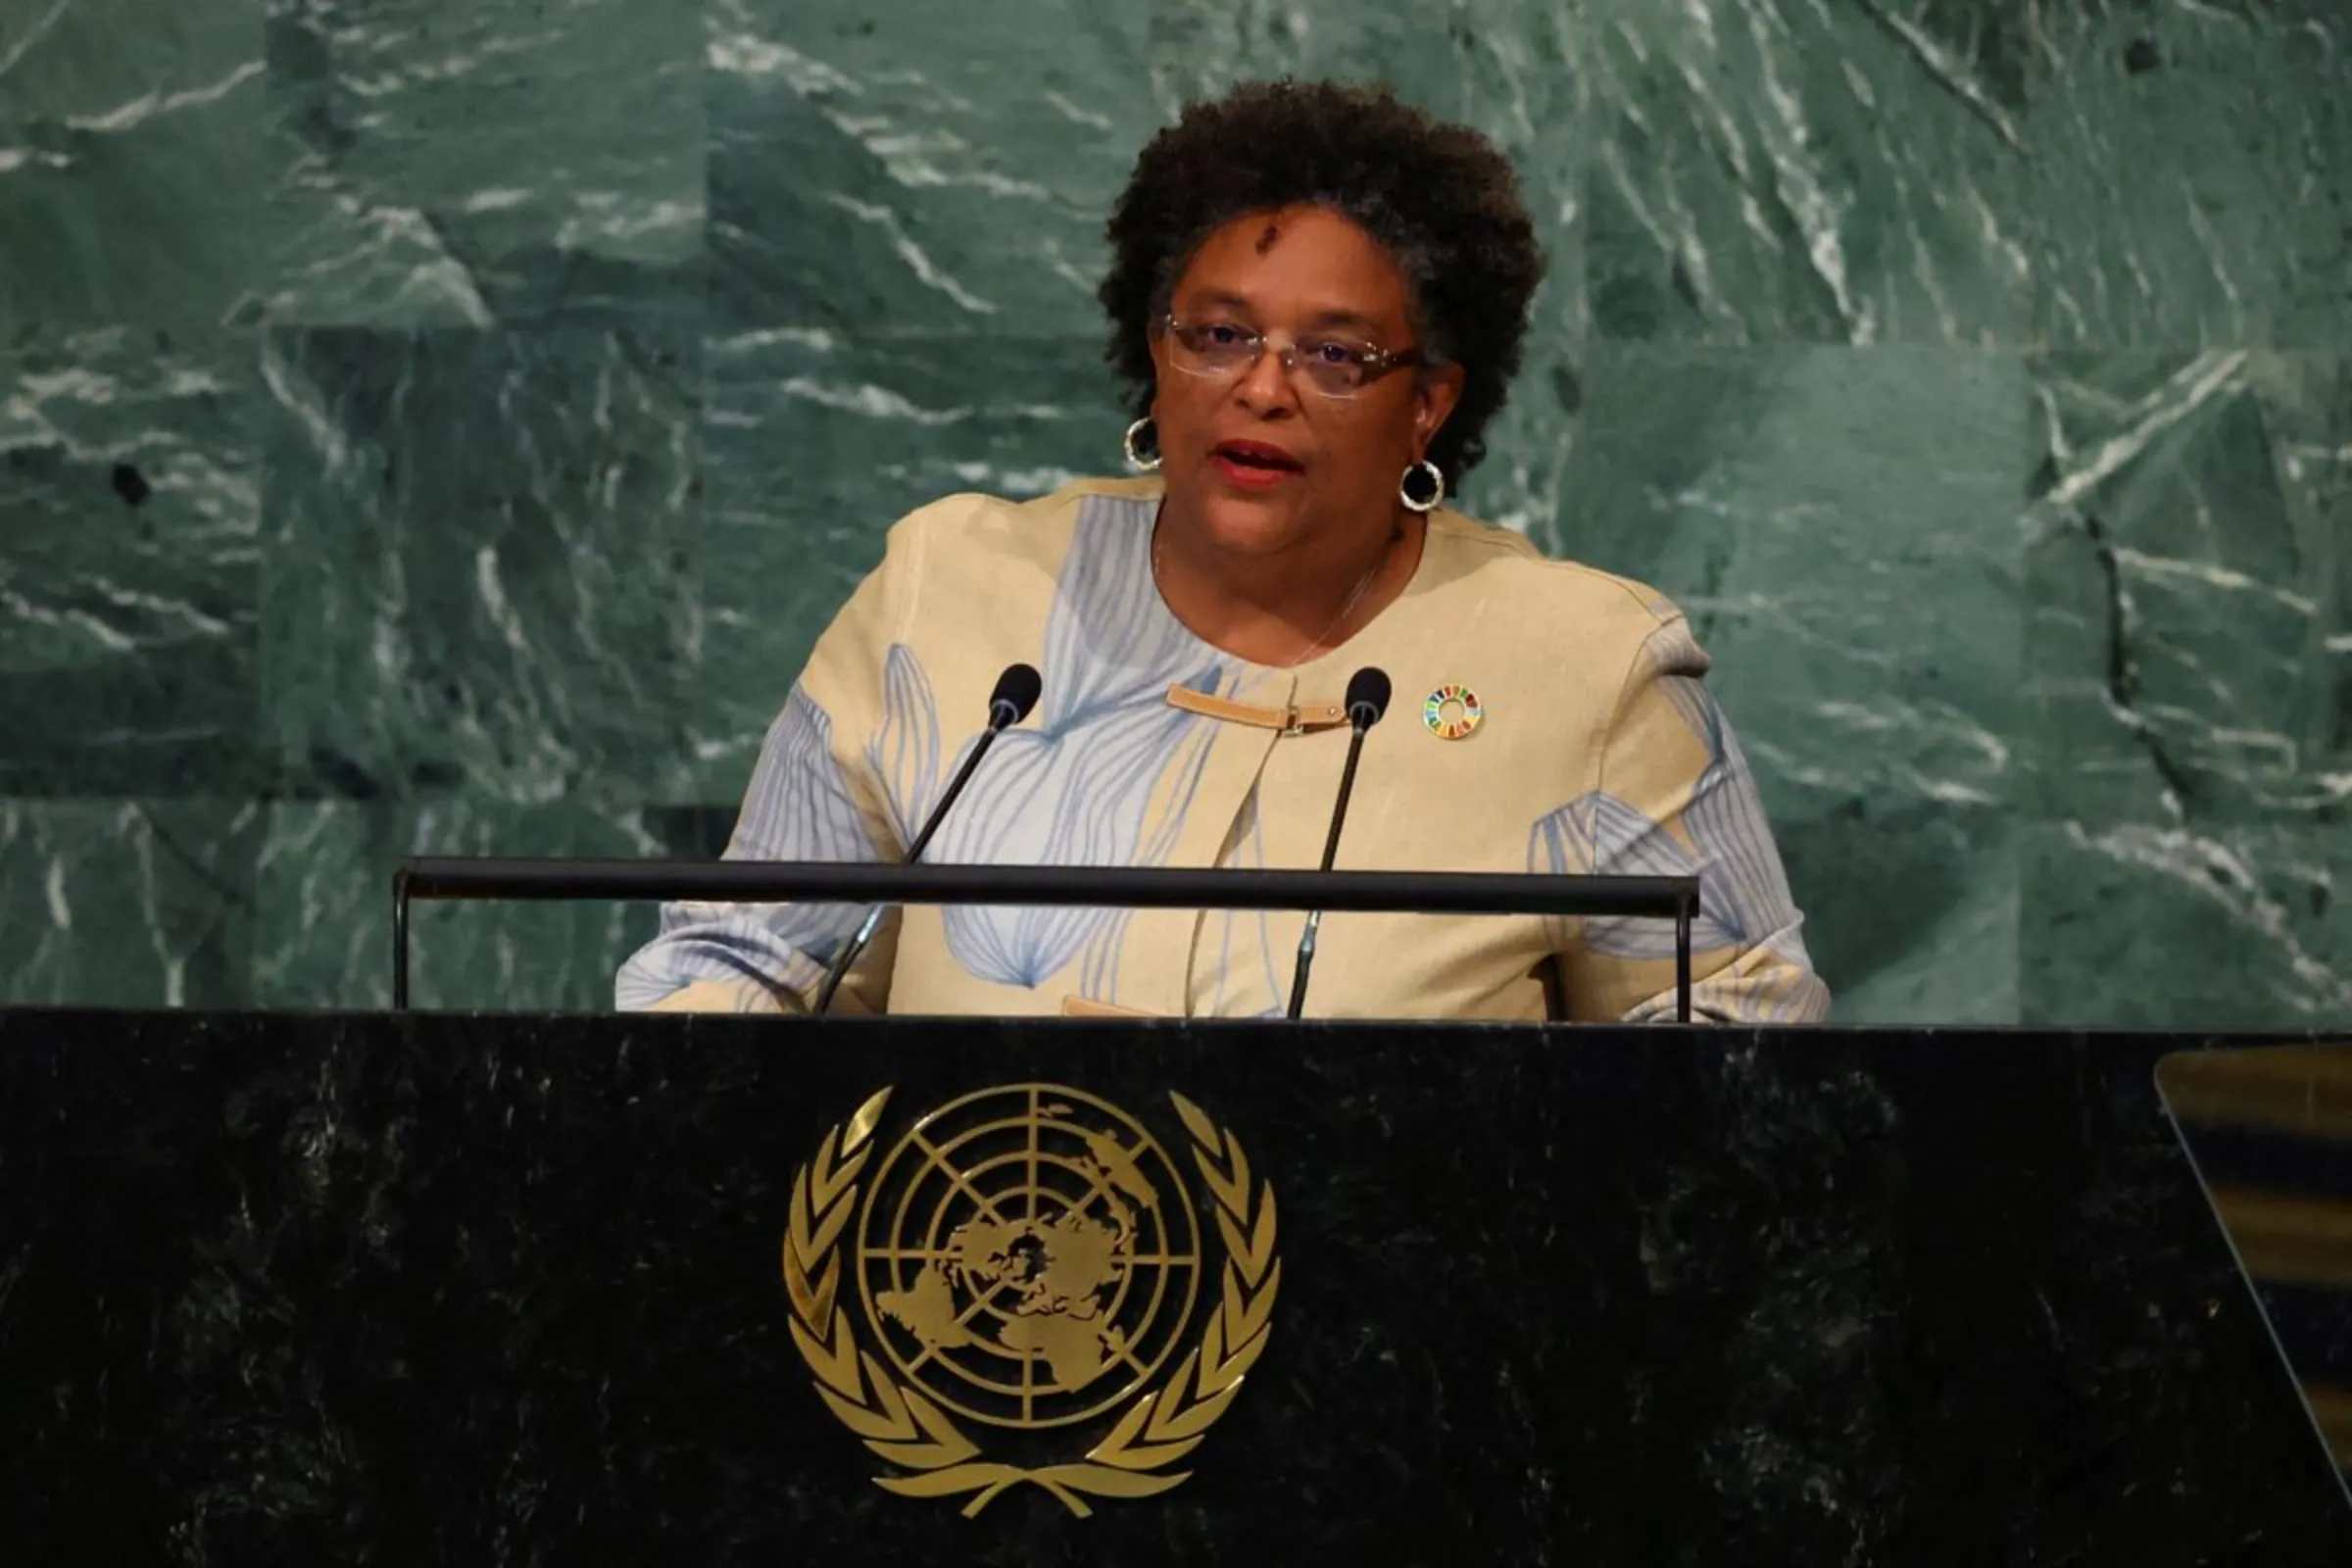 Prime Minister of Barbados Mia Mottley addresses the 77th Session of the United Nations General Assembly at U.N. Headquarters in New York City, U.S., September 22, 2022